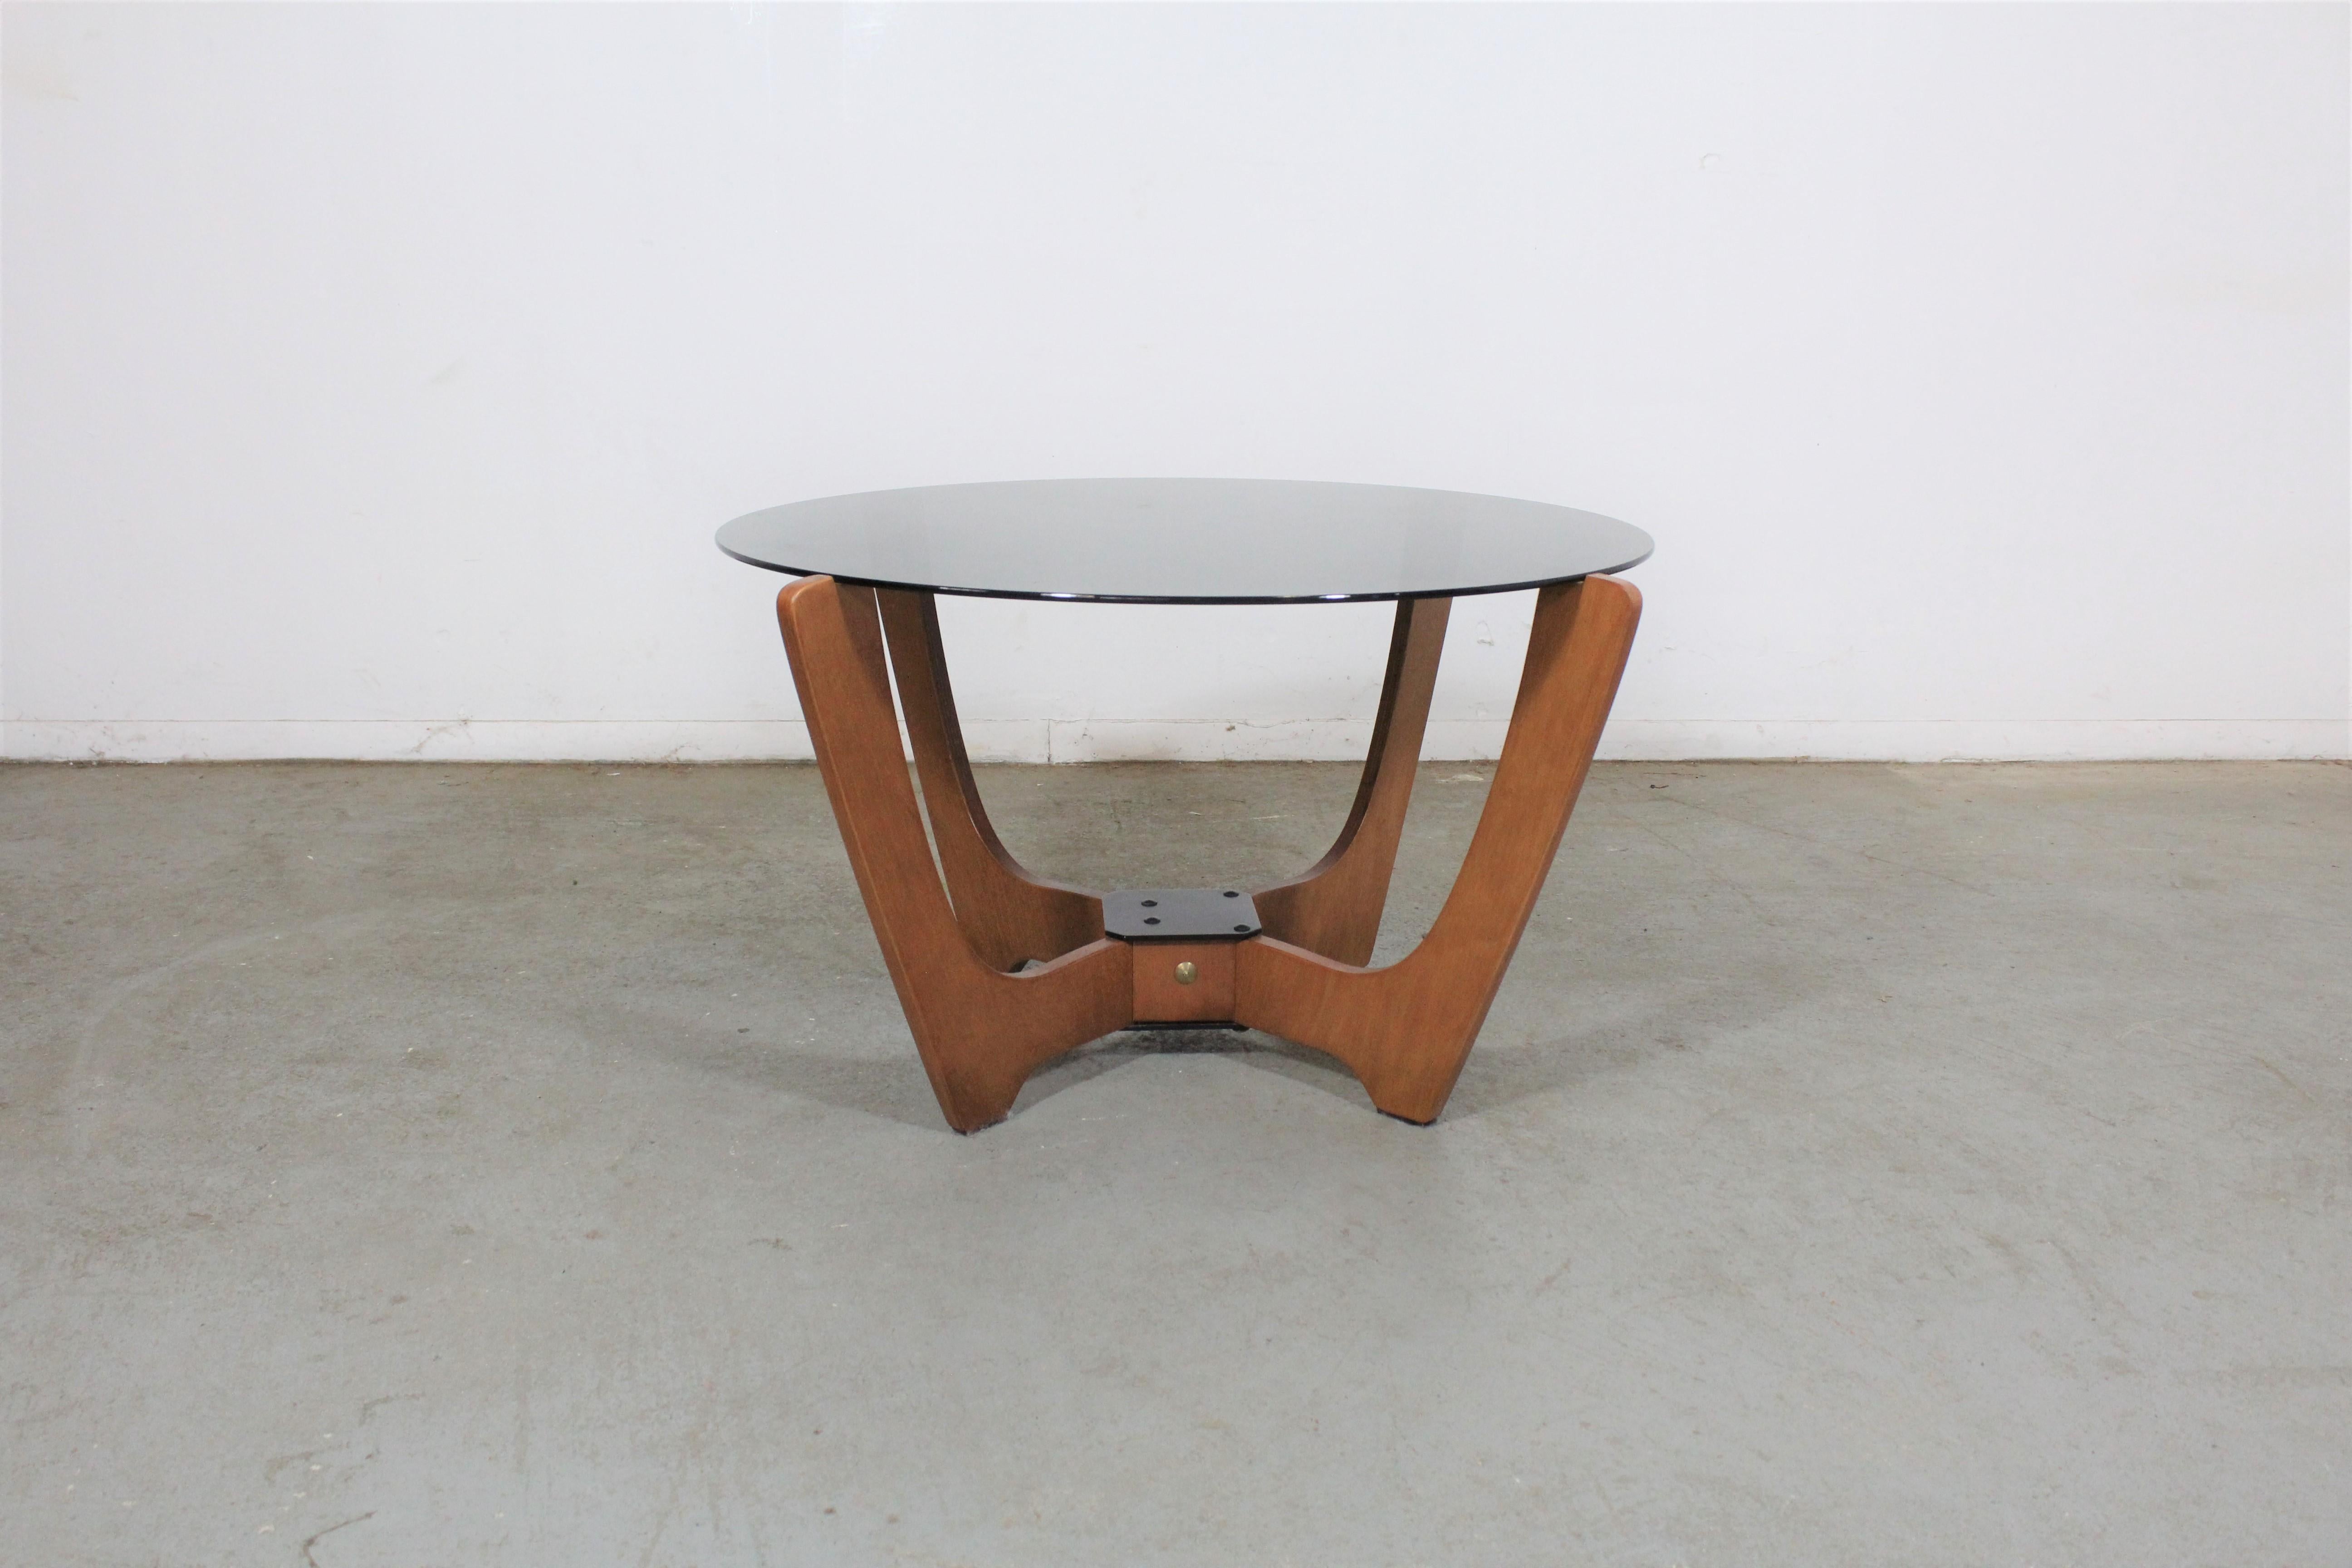 Odd Knutsen midcentury Danish modern glass top coffee table.

Offered is a vintage glass top coffee table. This table is signed by Luna and made by Norwegian designer Odd Knutsen. It is in good structurally sound condition with some cosmetic wear